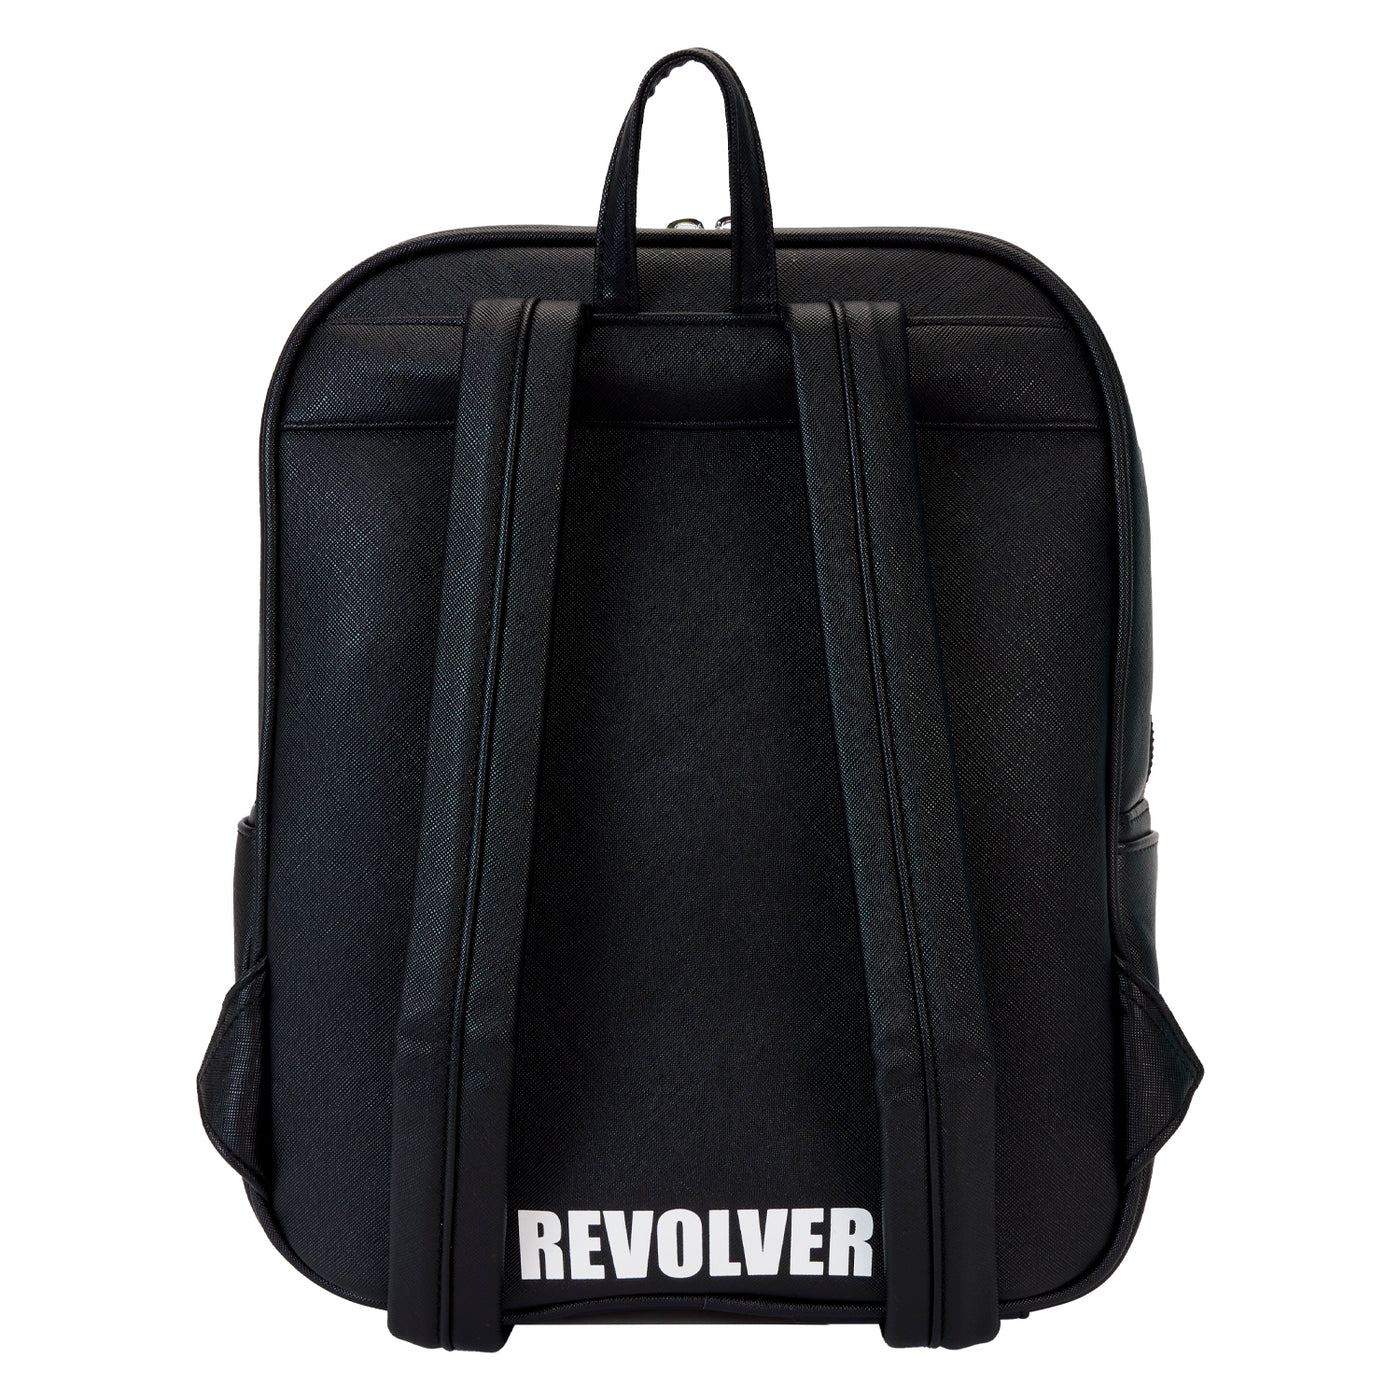 Loungefly The Beatles Revolver Album Cover with Record Coin bag Mini Backpack